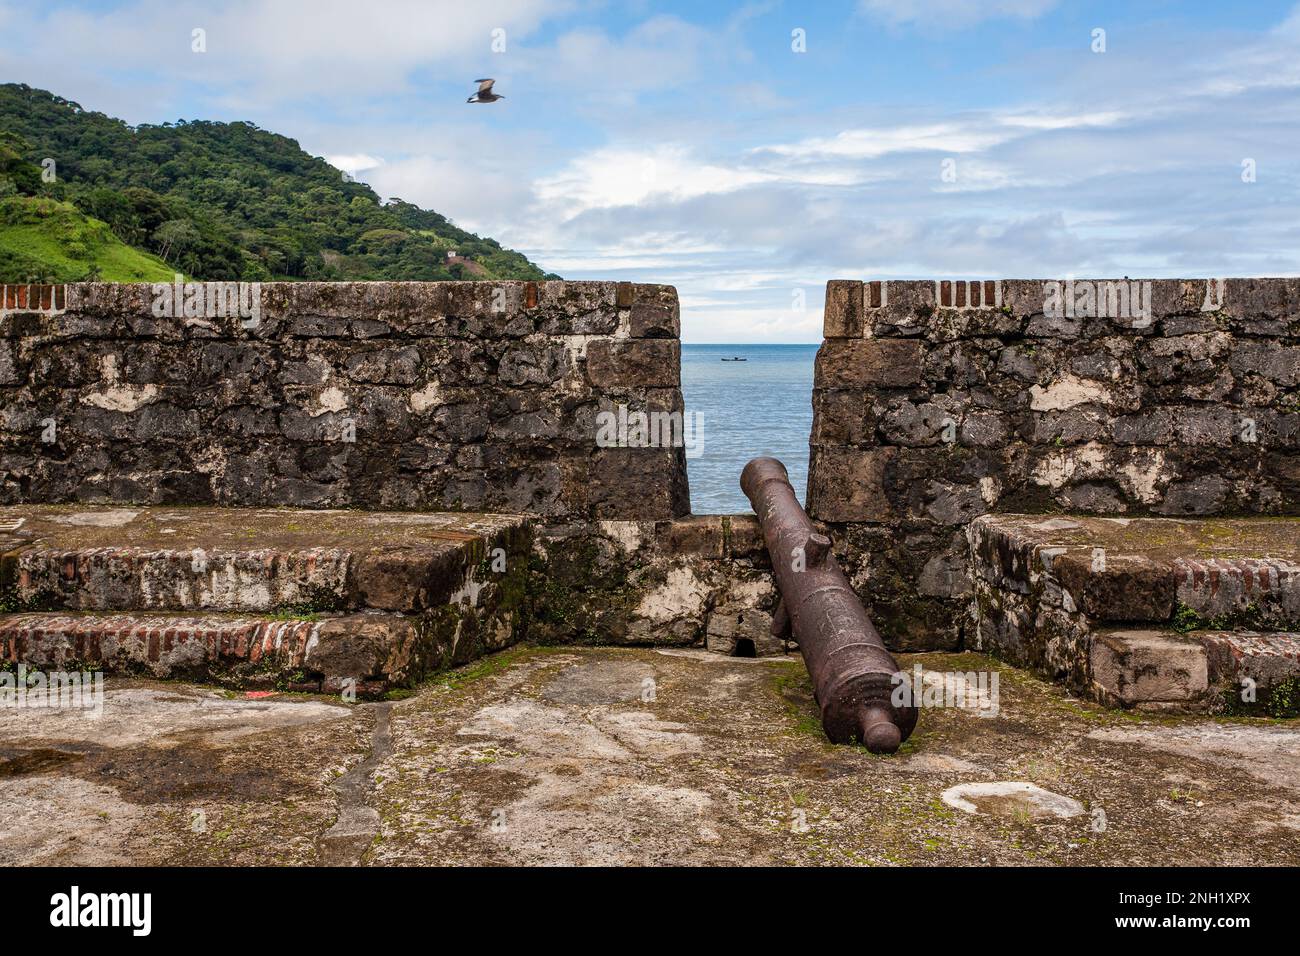 Fort San Geronimo, first built in 1664 and rebuilt in 1739.  Portobelo Bay was named by Christopher Columbus in 1502.  The town was founded in 1597 as Stock Photo